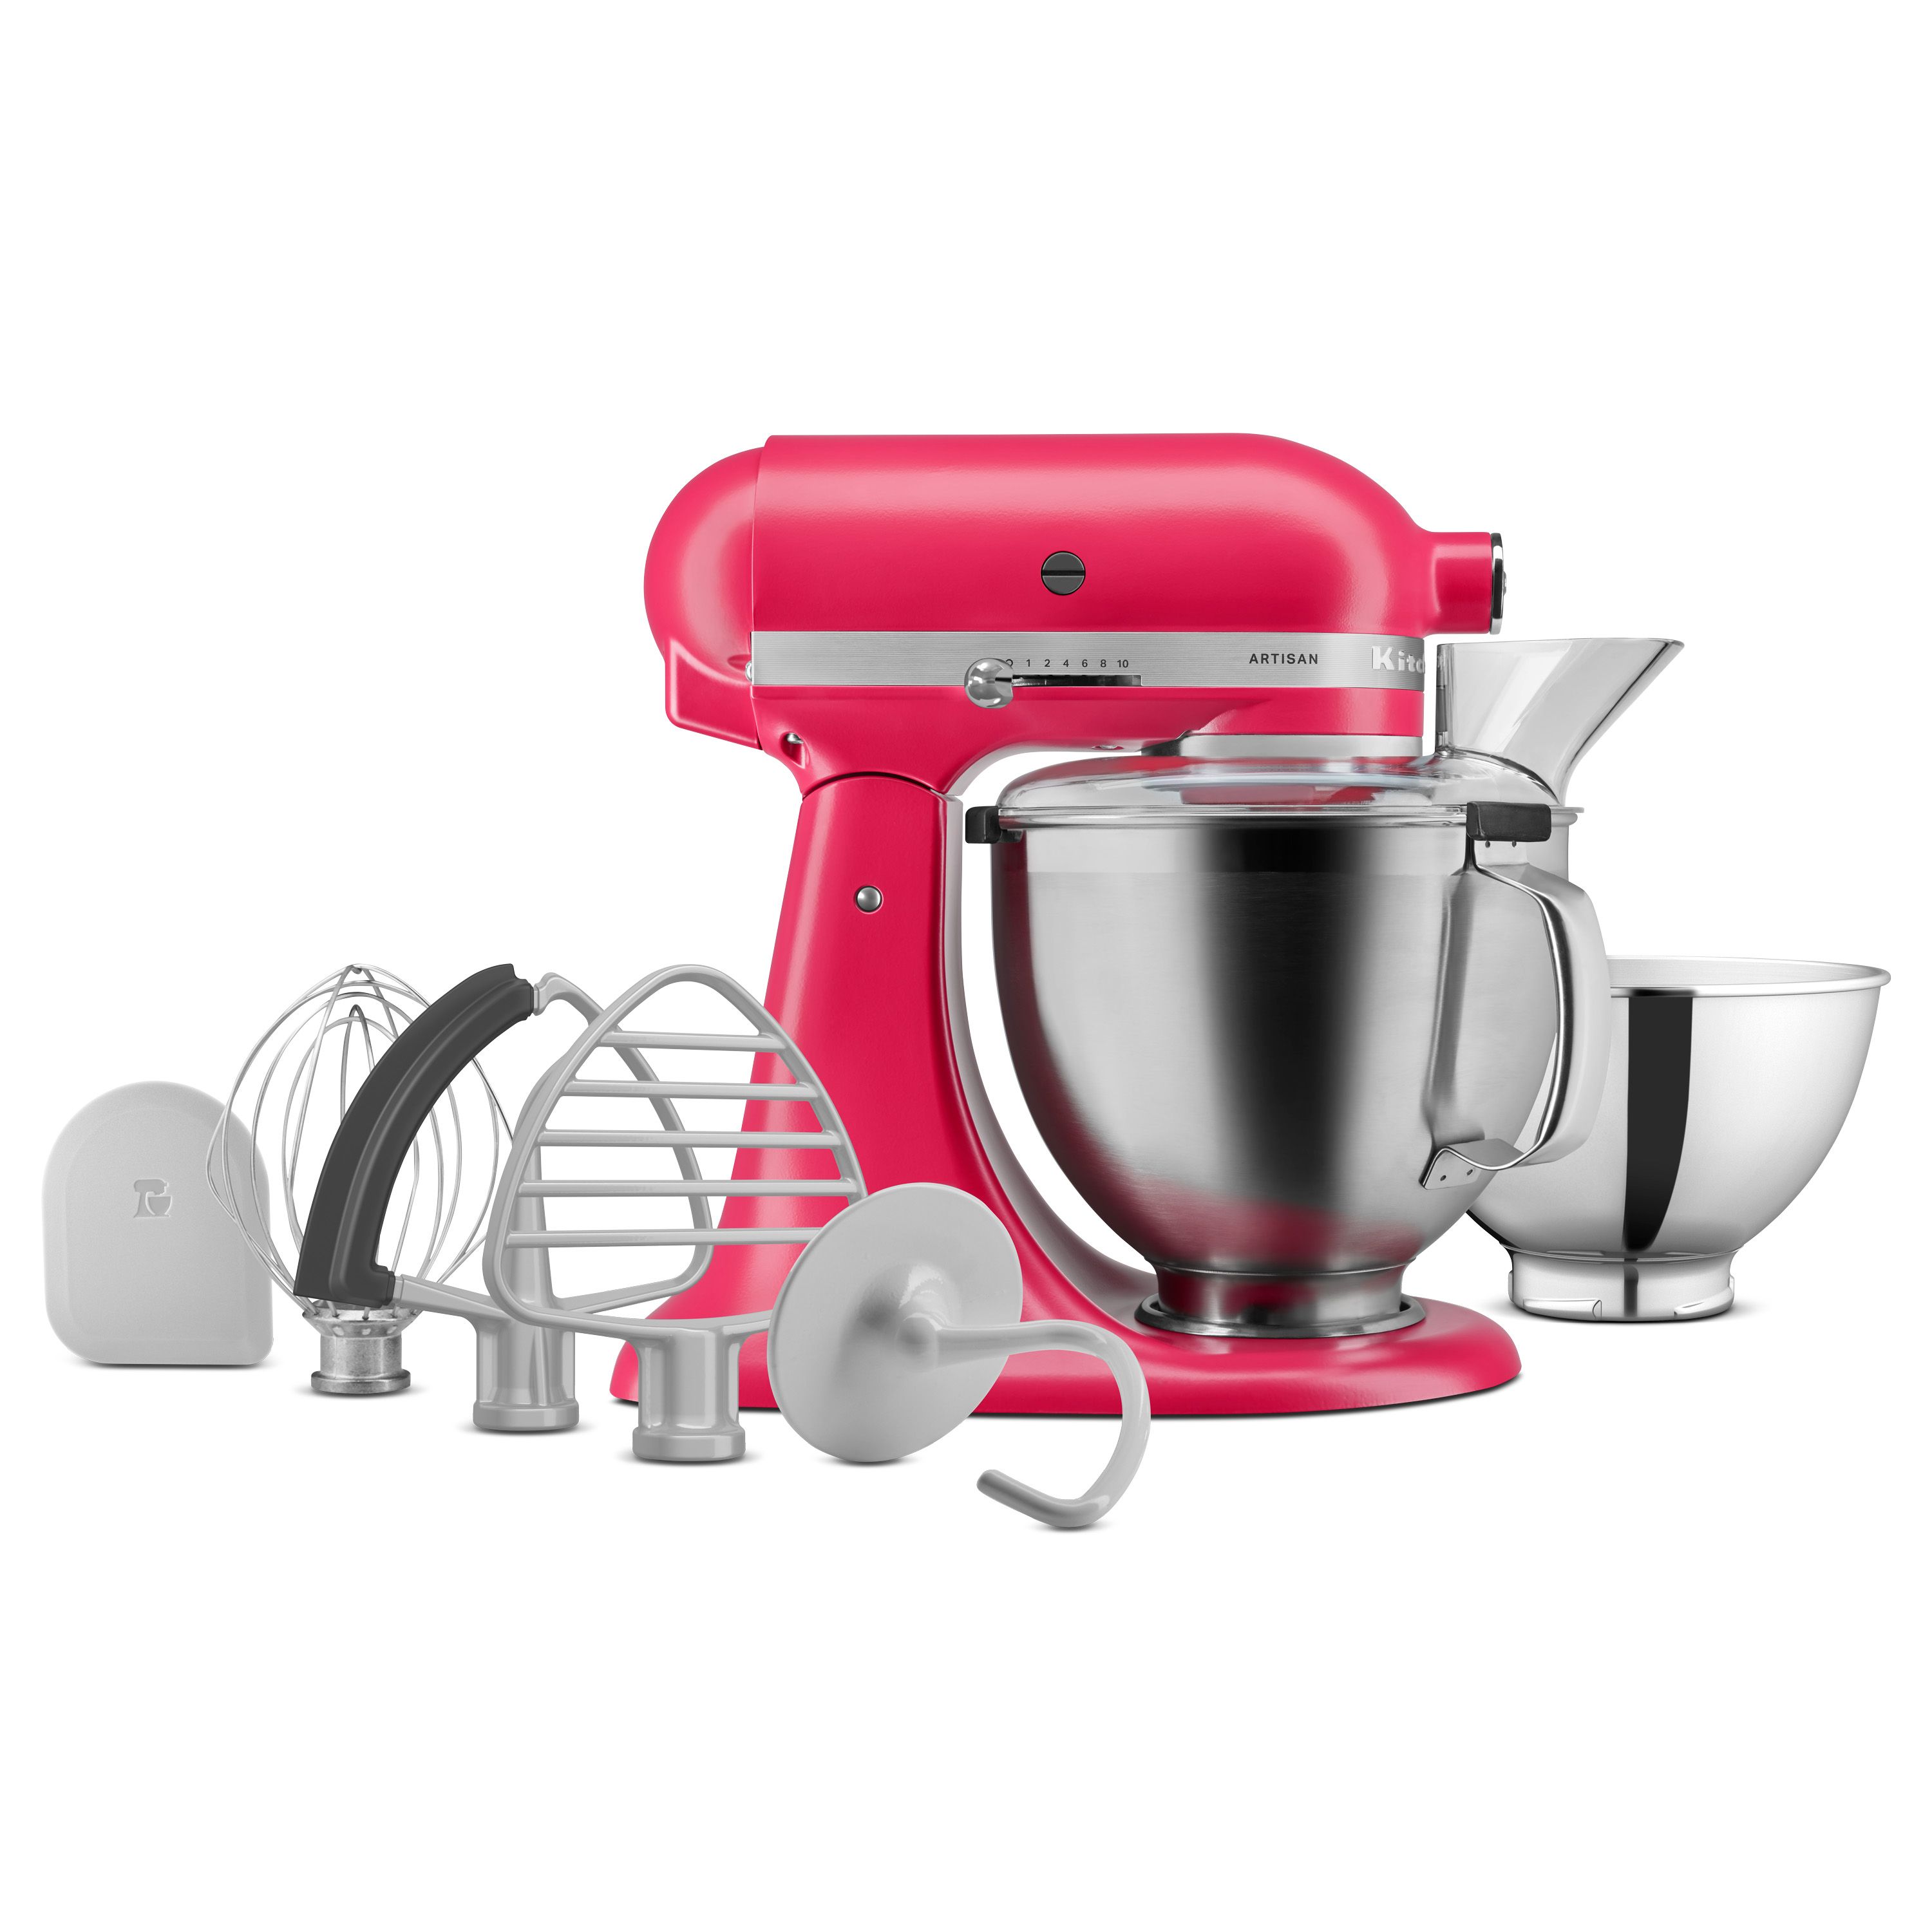 https://hips.hearstapps.com/hmg-prod/images/kitchen-aid-hibiscus-stand-mixer-1675934873.jpg